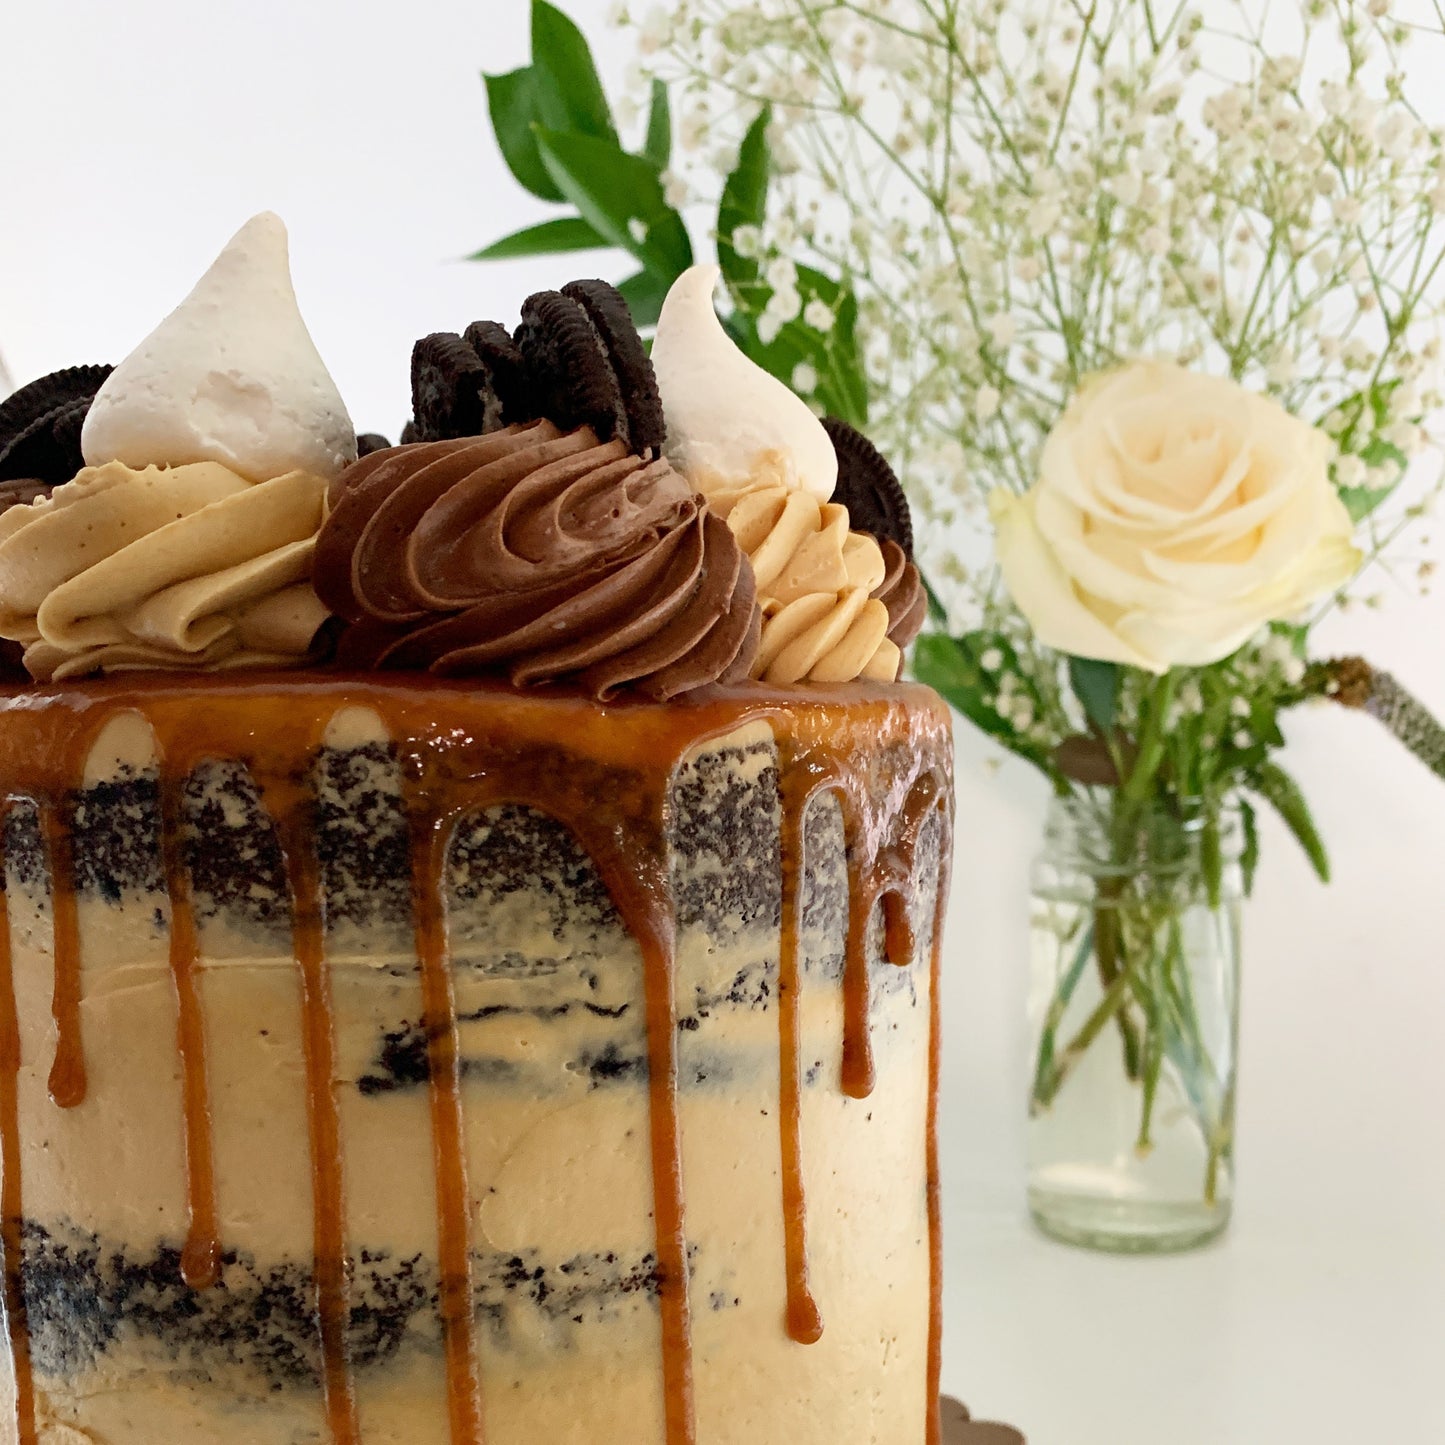 “How do you want it?”: Build Your Own Layer Cake